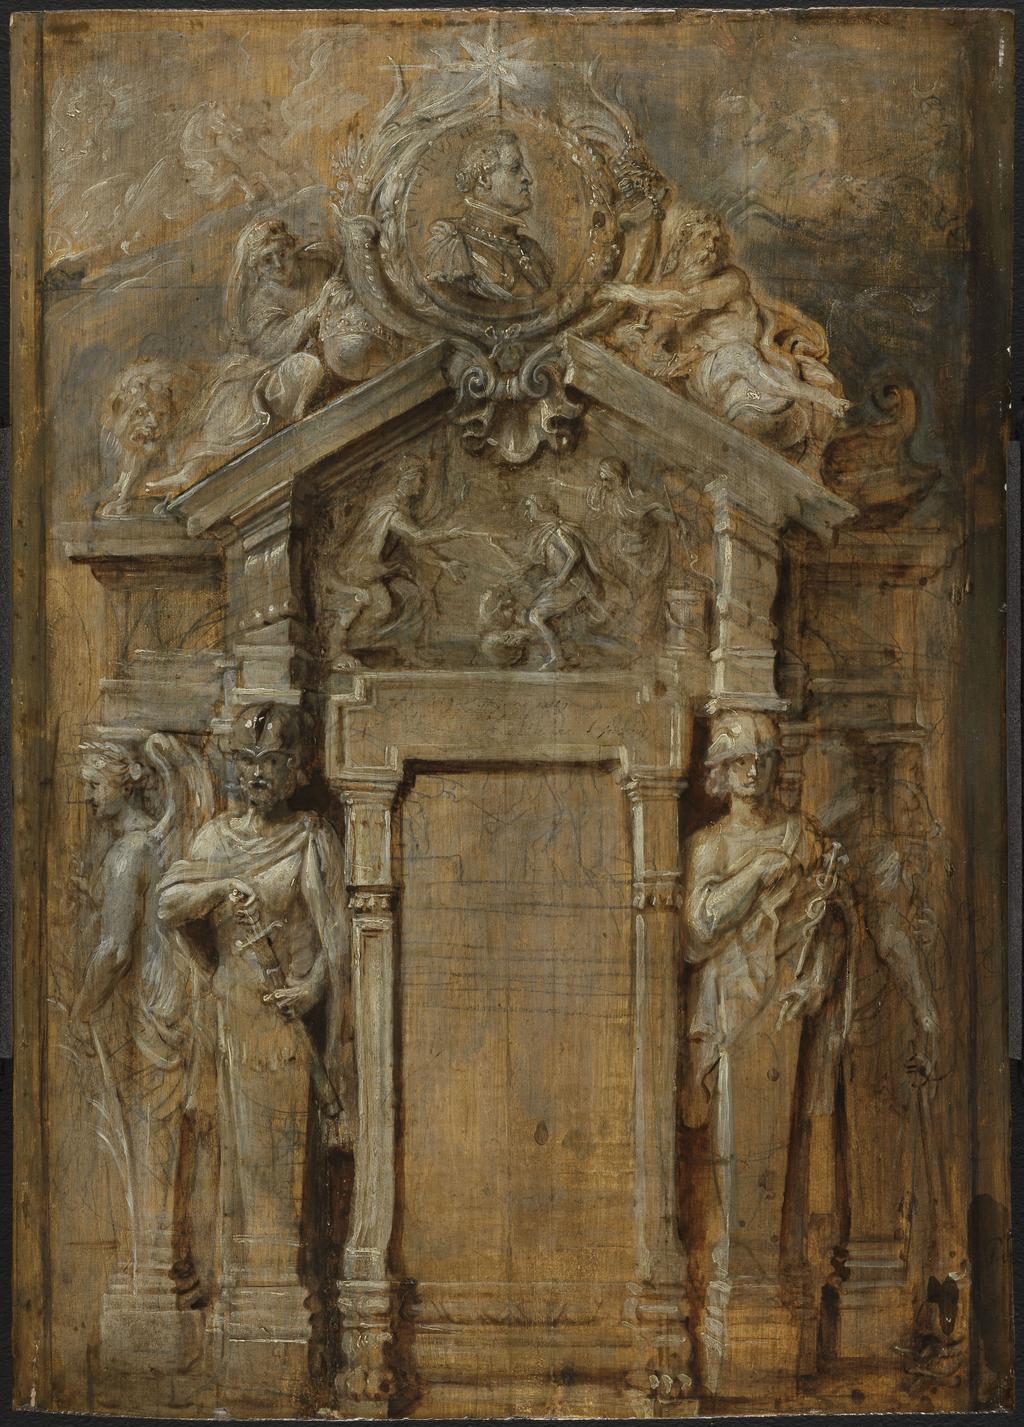 An image of Design for the title page of the Pompa Introitus...Ferdinandi. Sketch for the 'Eucharist' series of designs. Rubens, Peter Paul (Flemish 1577-1640). Oil on panel, height 52.4 cm, width 37.5 cm, circa 1625-1626.